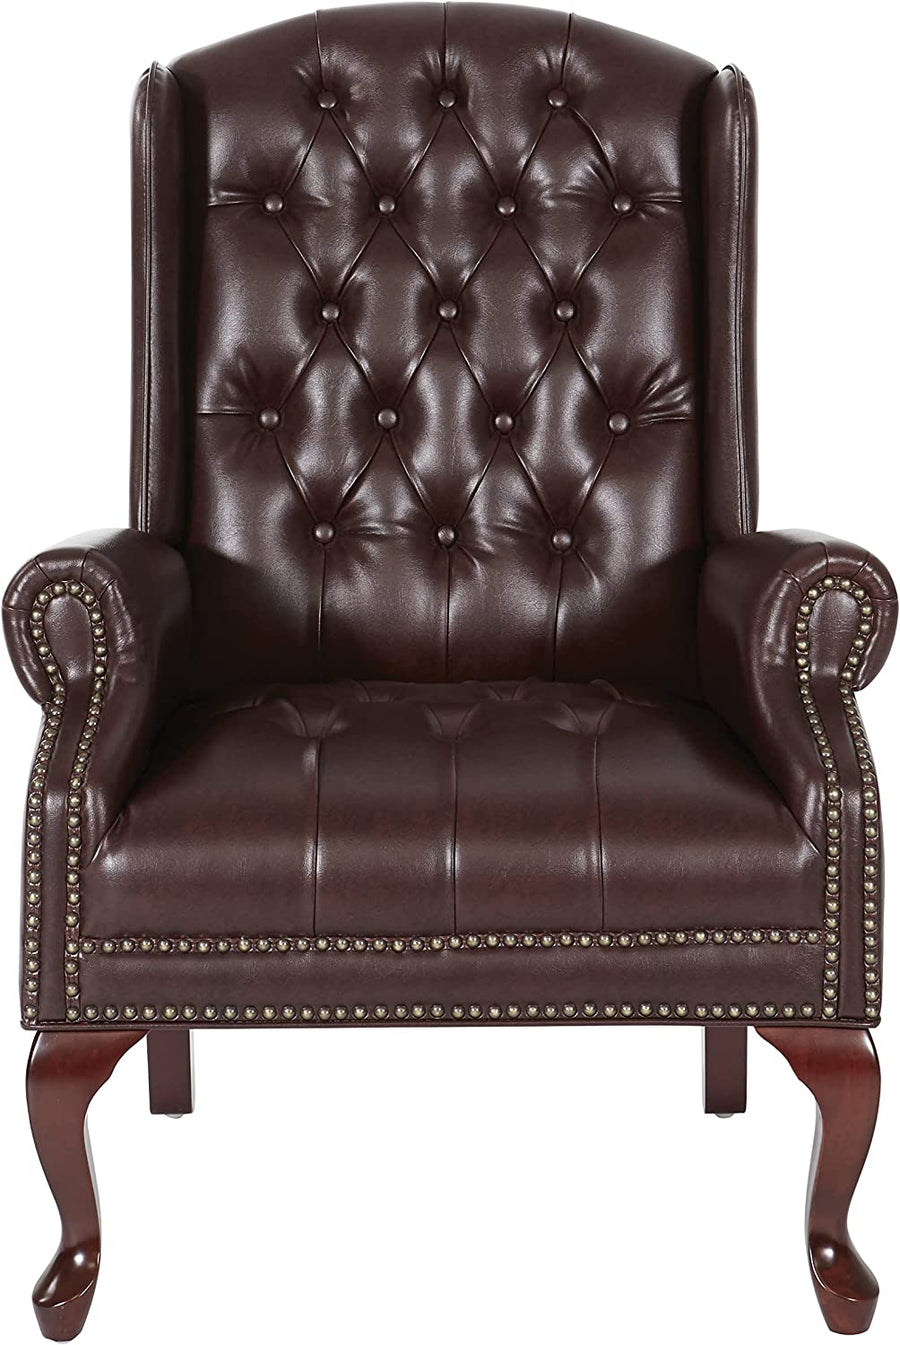 Office Star TEX Traditional Queen Anne Style Chair - $195